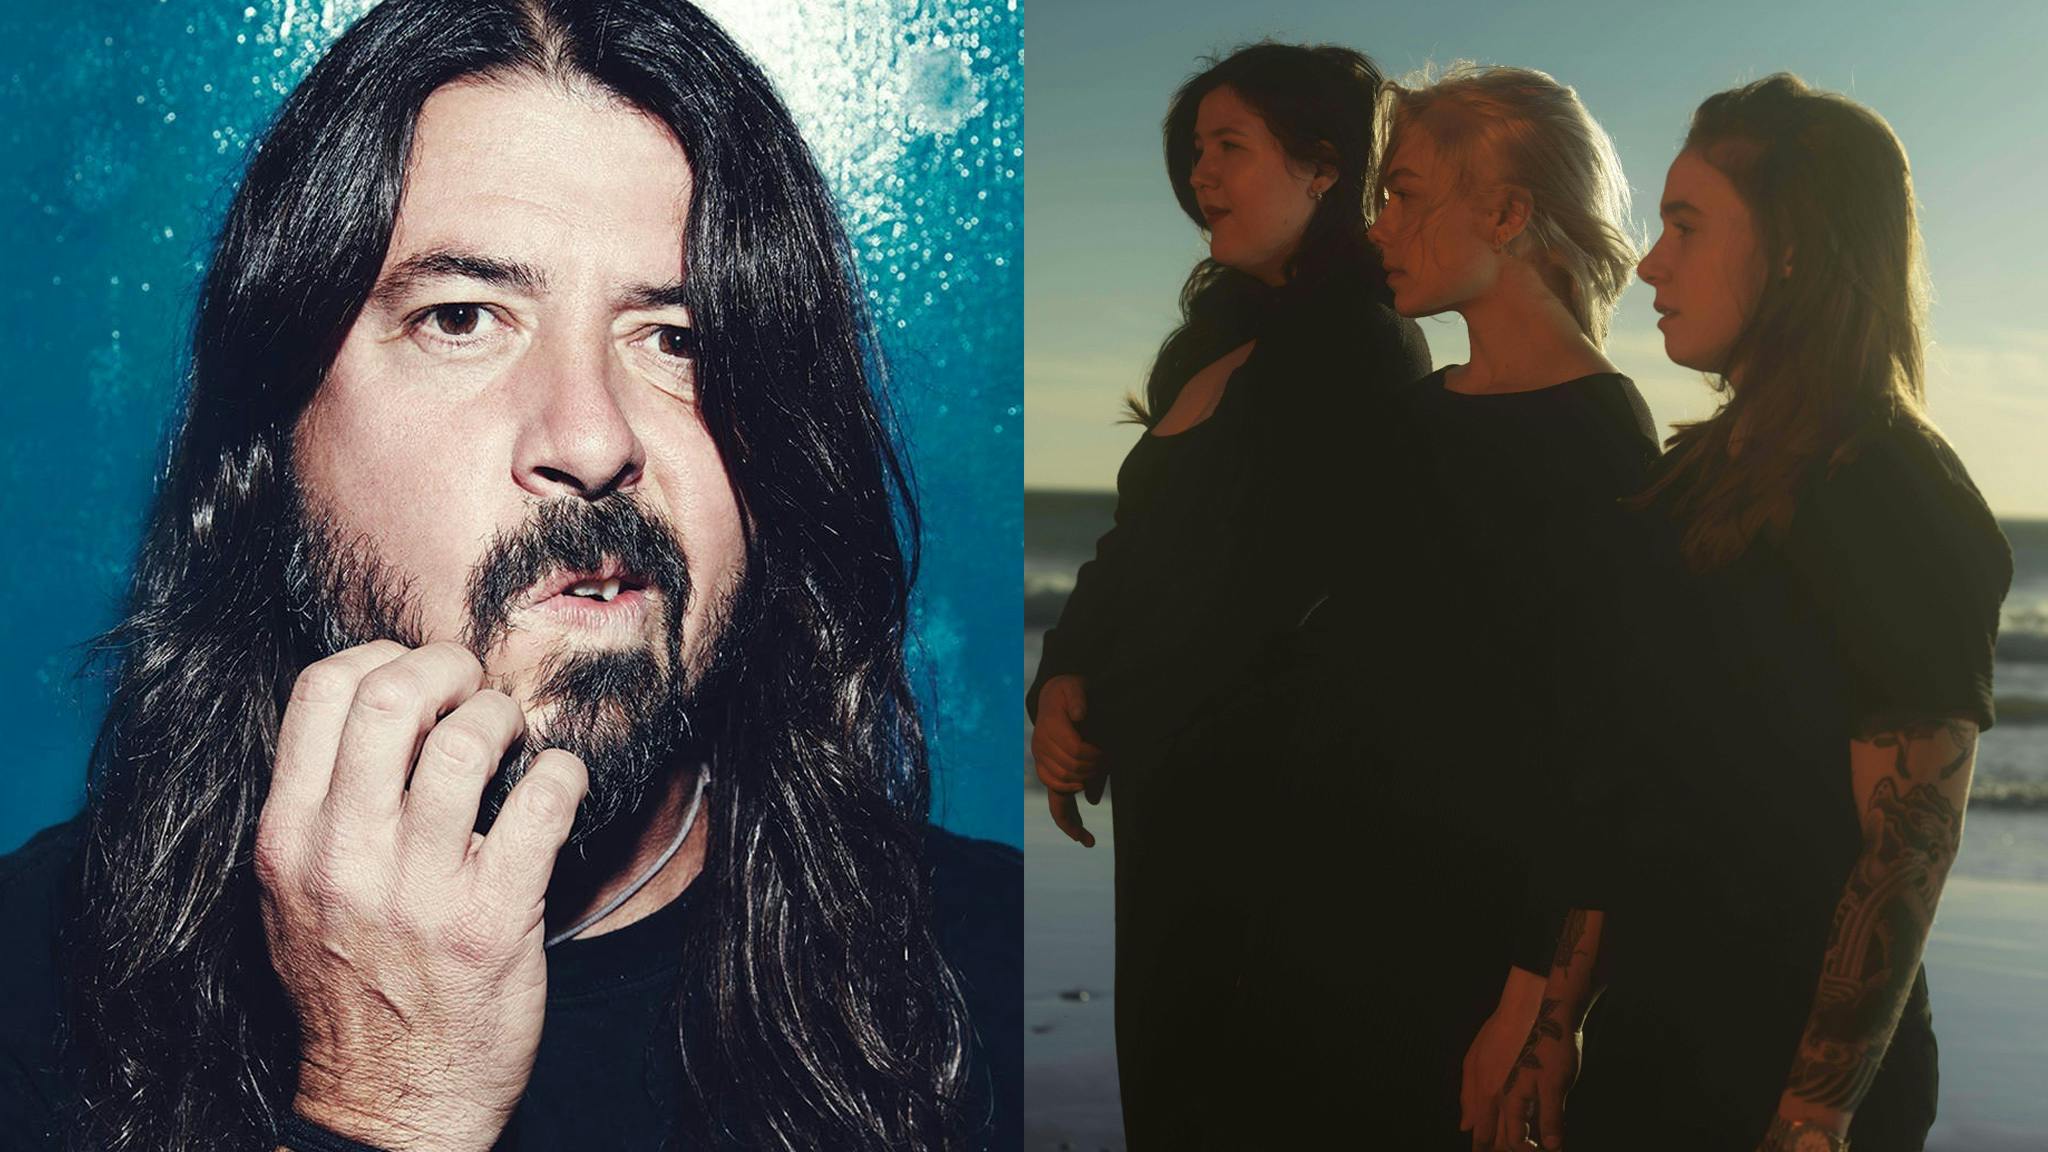 See Dave Grohl play Satanist on drums with boygenius